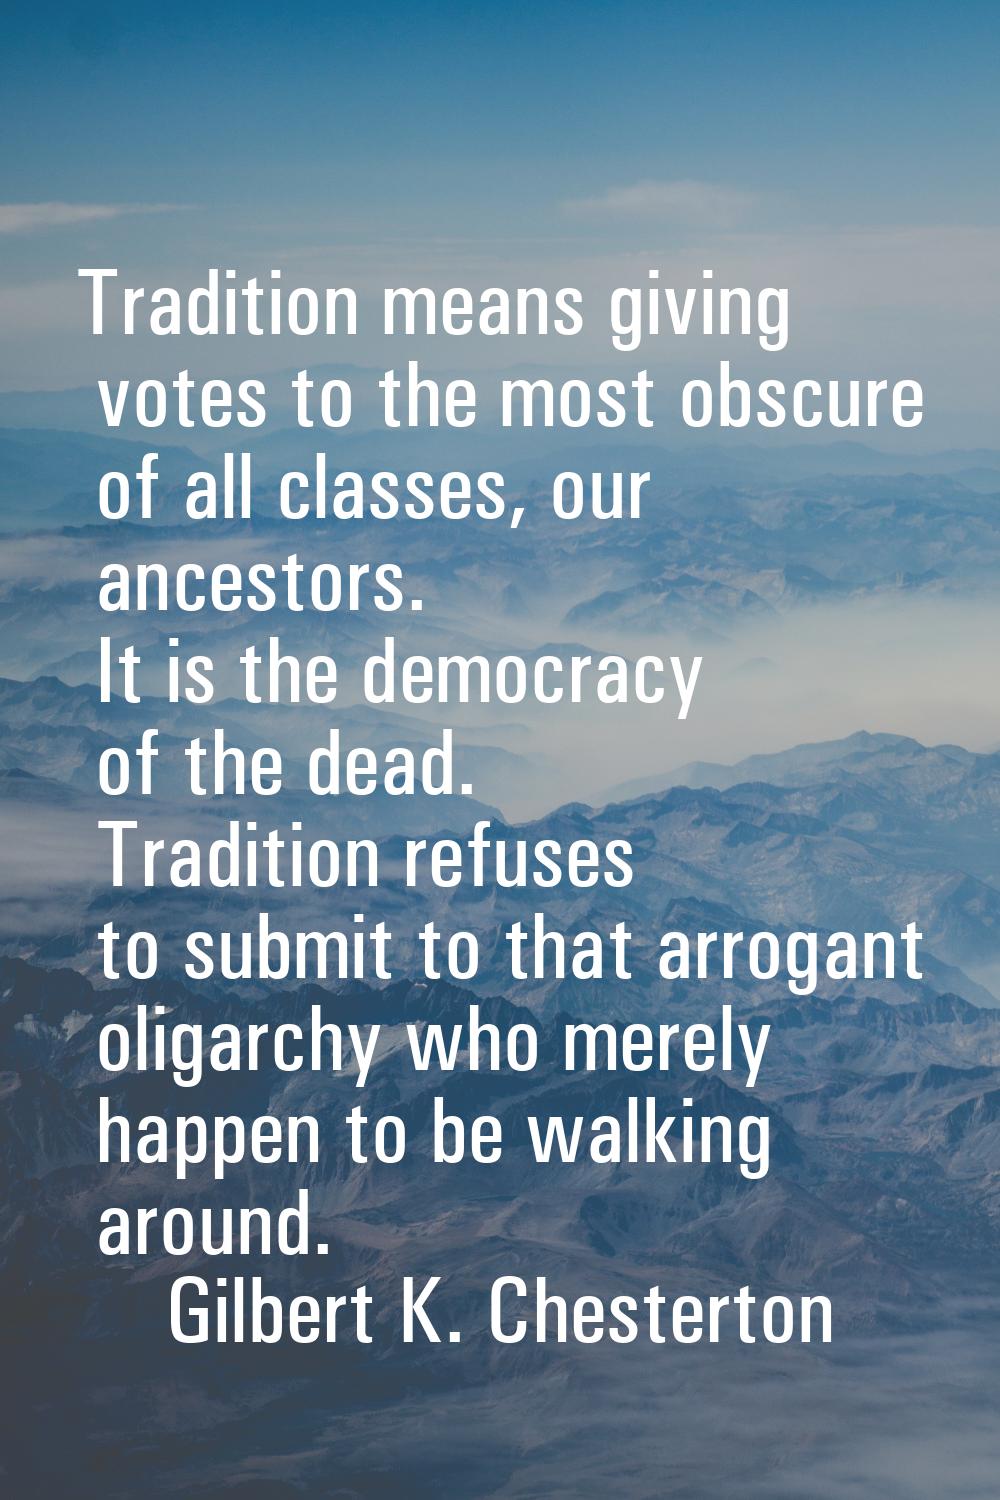 Tradition means giving votes to the most obscure of all classes, our ancestors. It is the democracy